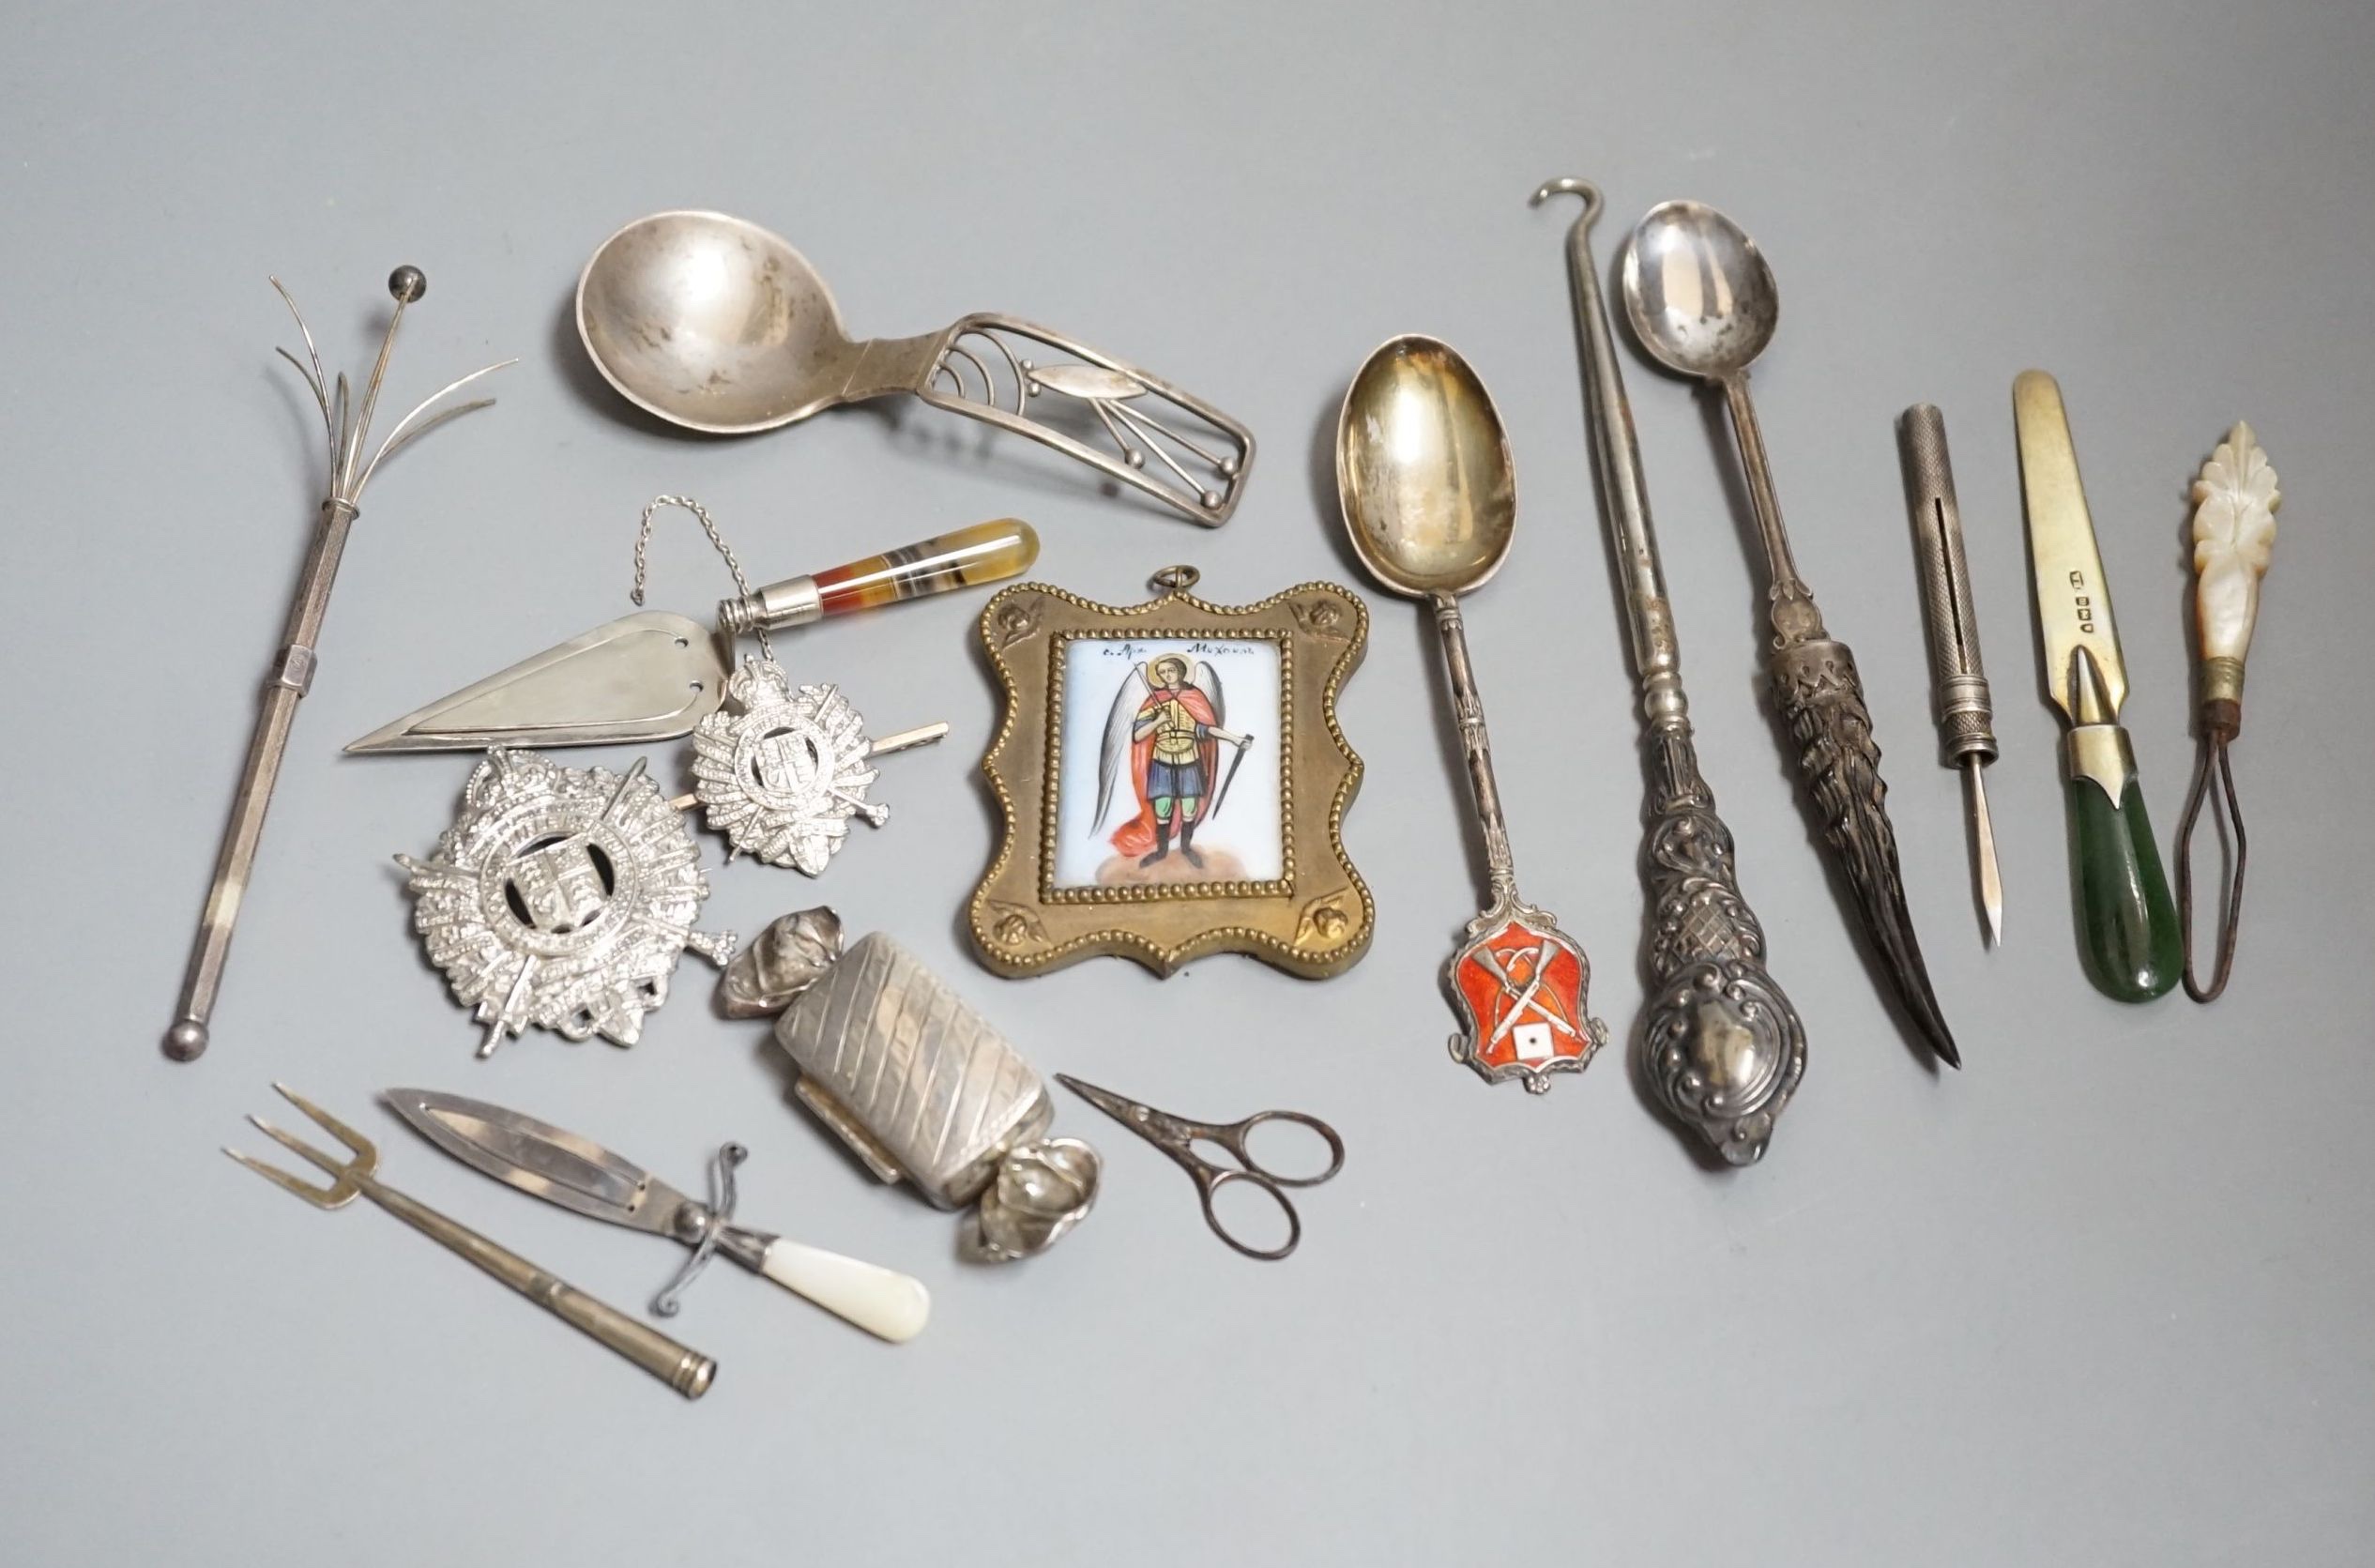 Sundry small silver etc. including a Danish sterling caddy spoon, by Franz Hingelberg, 9.7cm, nephrite handles silver gilt paper knife, swizzle stick, button hook, agate handled trowel bookmark, two badges etc.